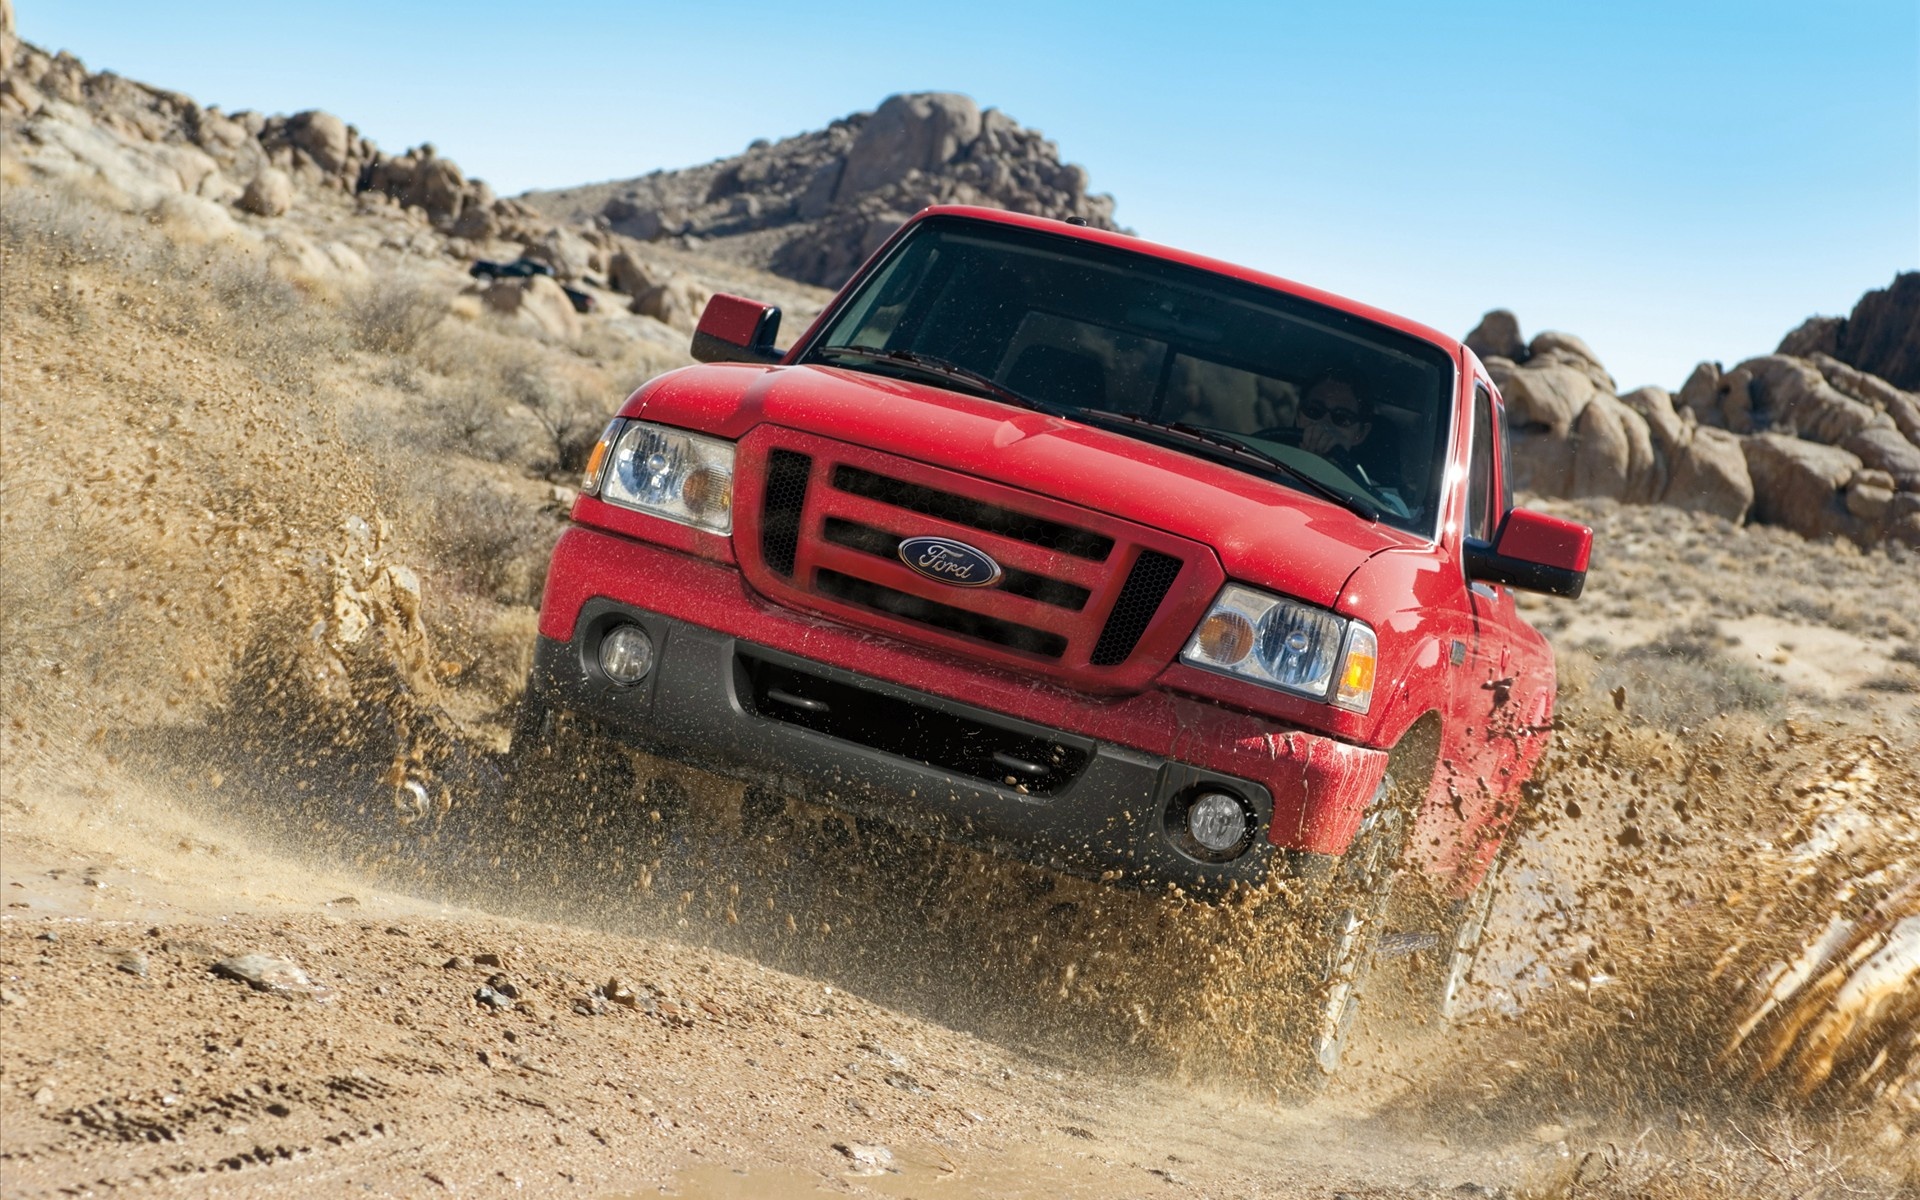 Vehicles Ford Ranger HD Wallpaper | Background Image